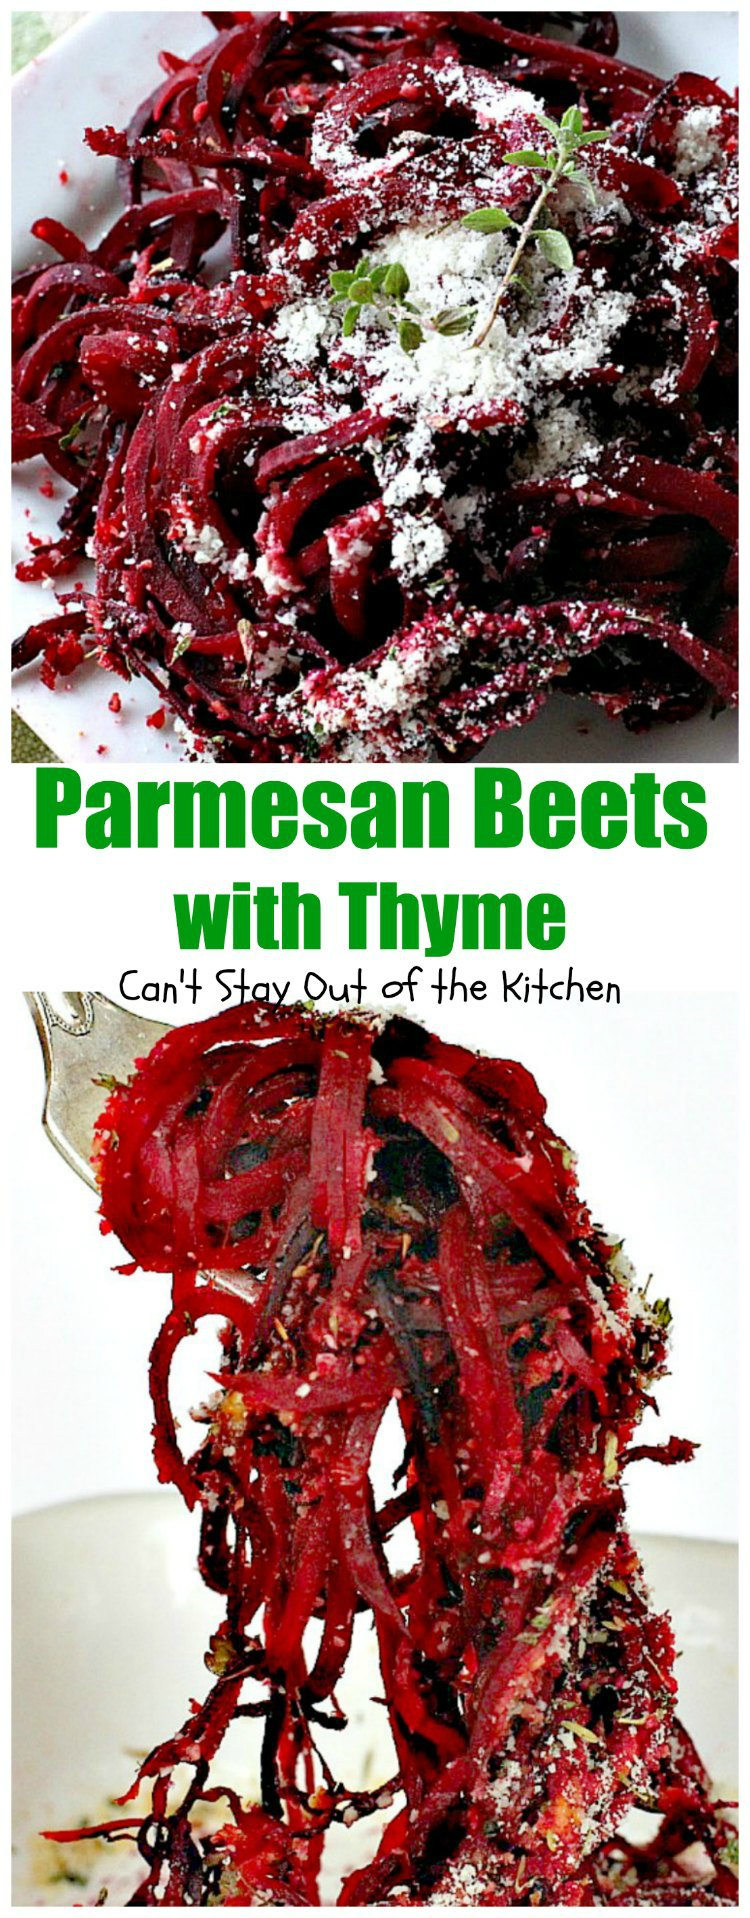 Parmesan Beets with Thyme | Can't Stay Out of the Kitchen